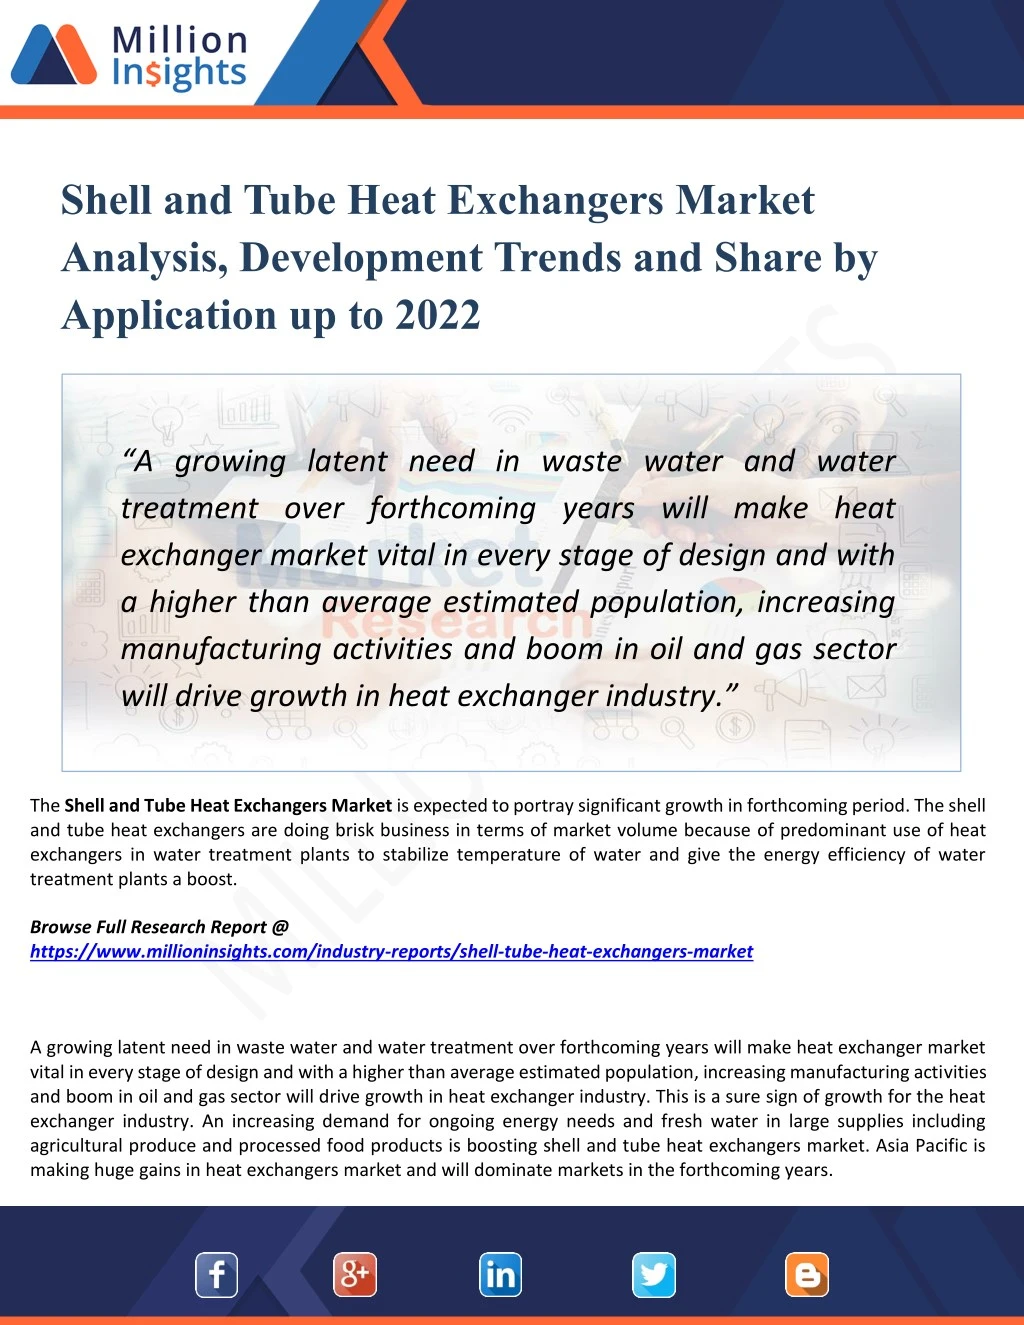 shell and tube heat exchangers market analysis